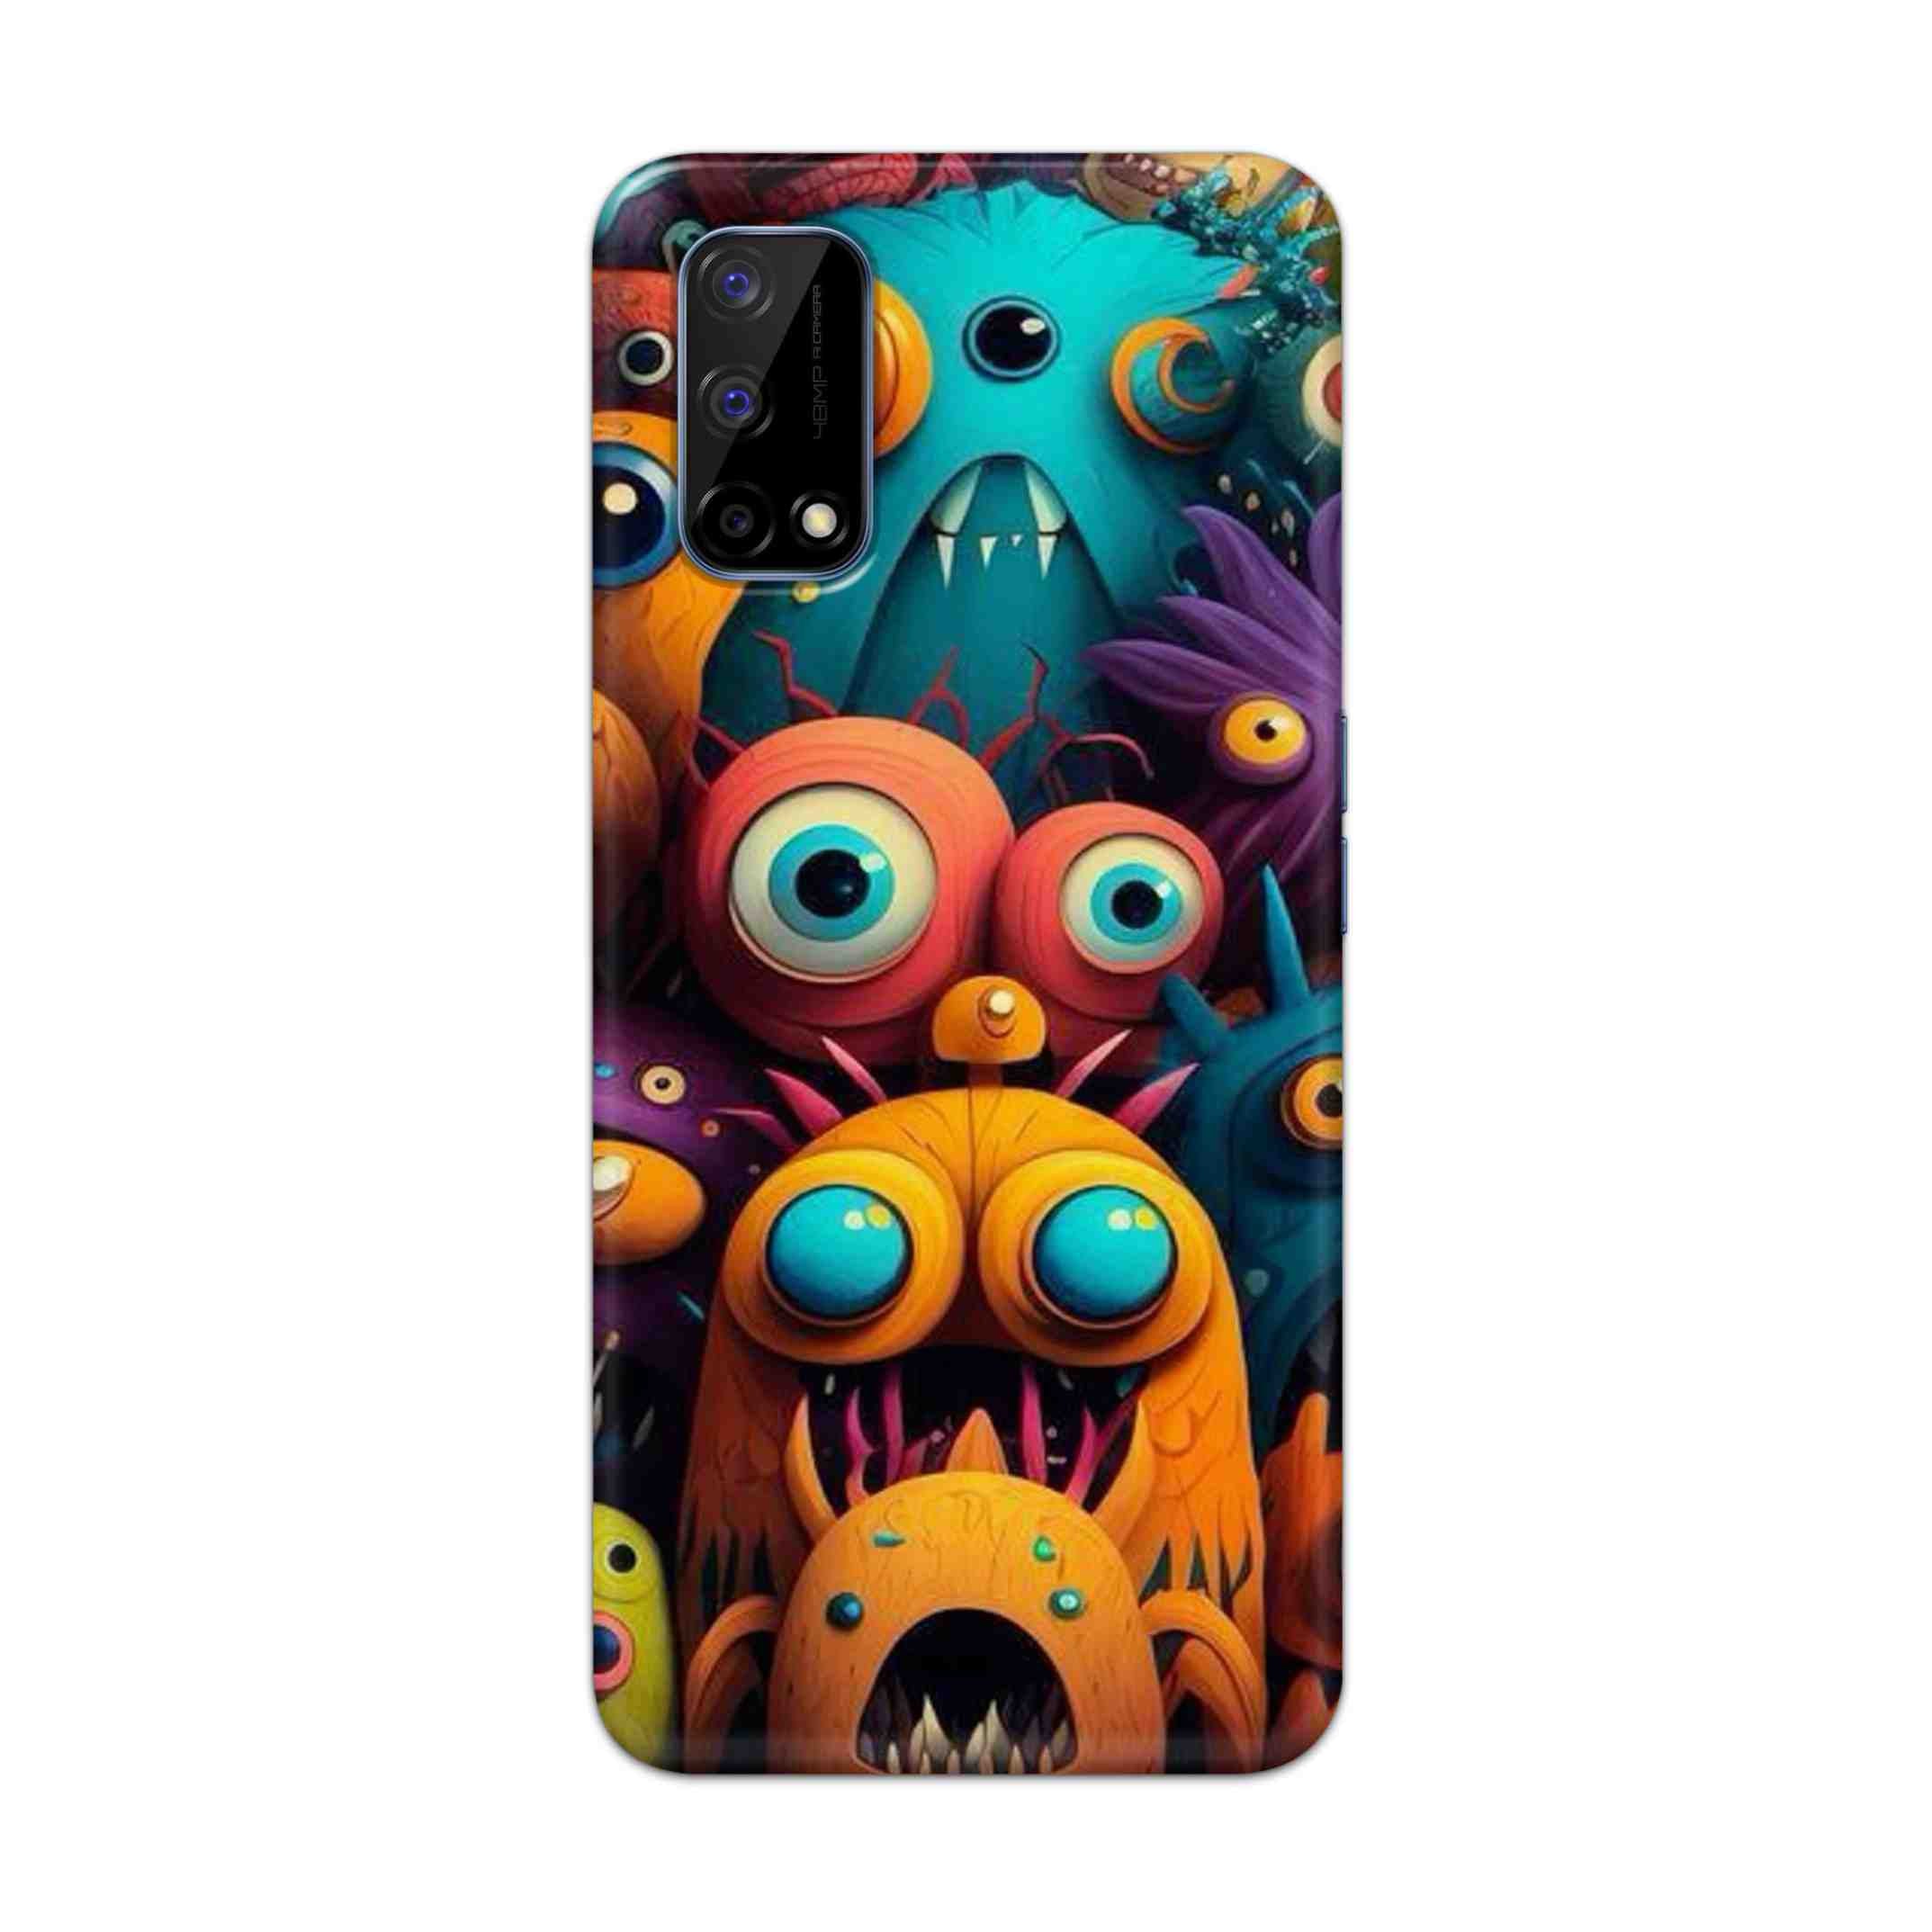 Buy Zombie Hard Back Mobile Phone Case Cover For Realme Narzo 30 Pro Online